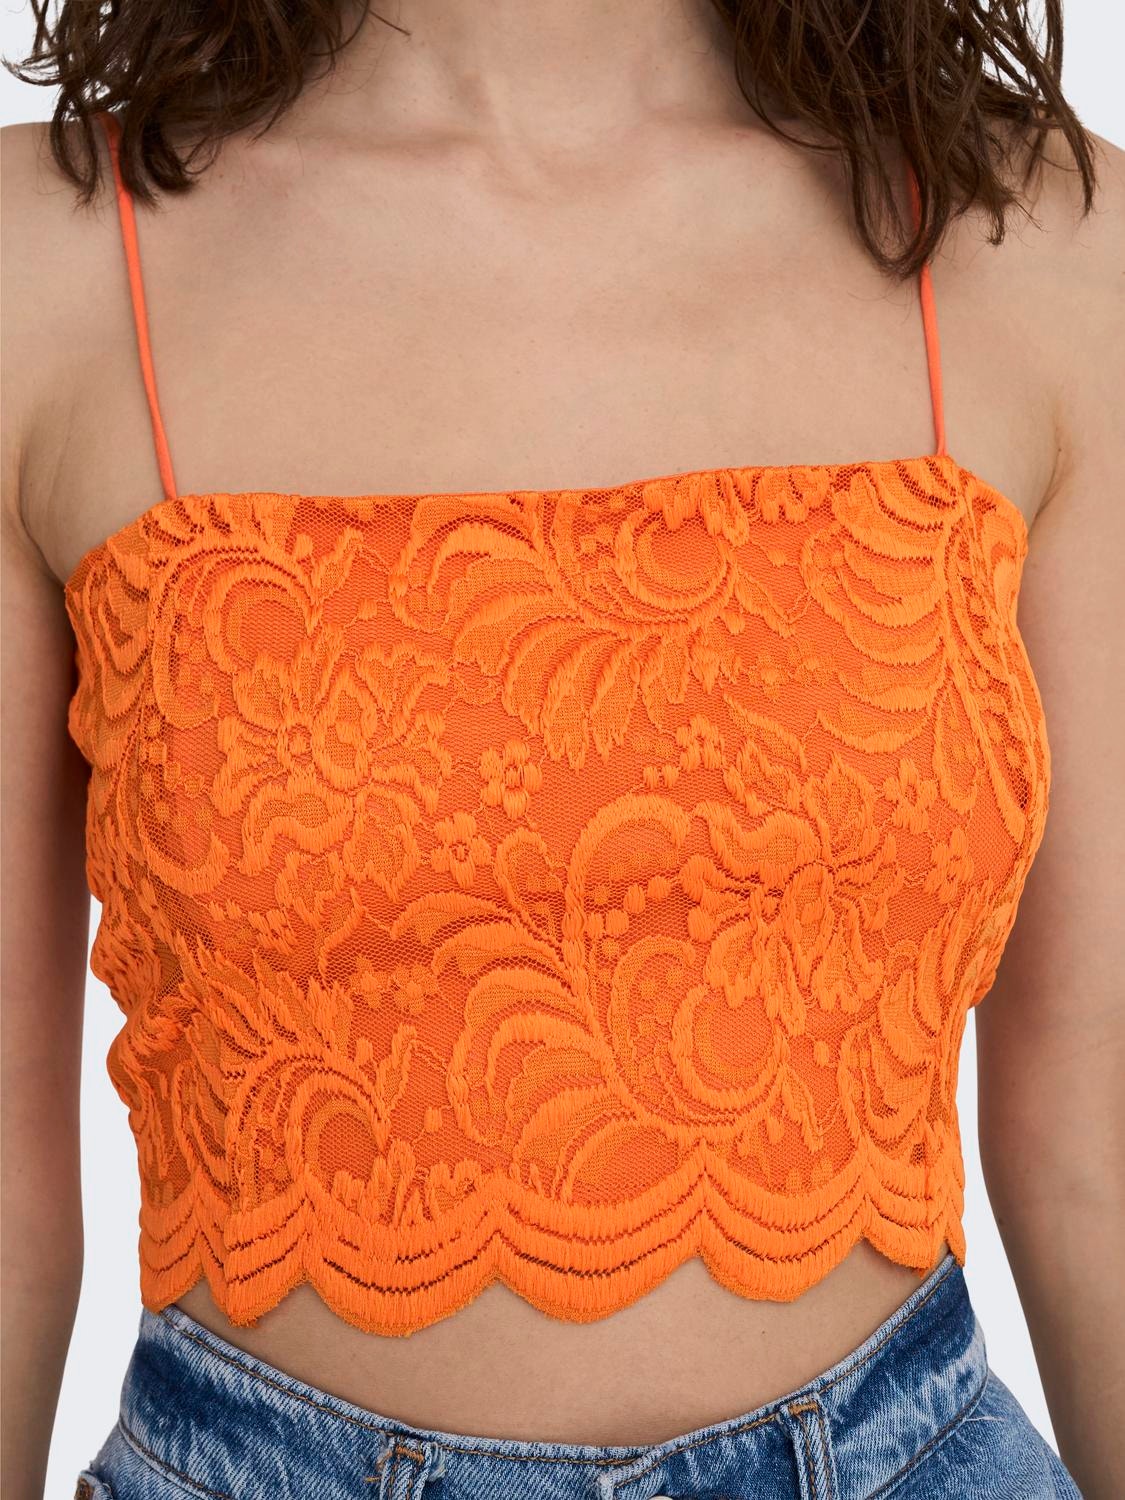 ONLY Cropped Lace Top -Orange Peel - 15291450